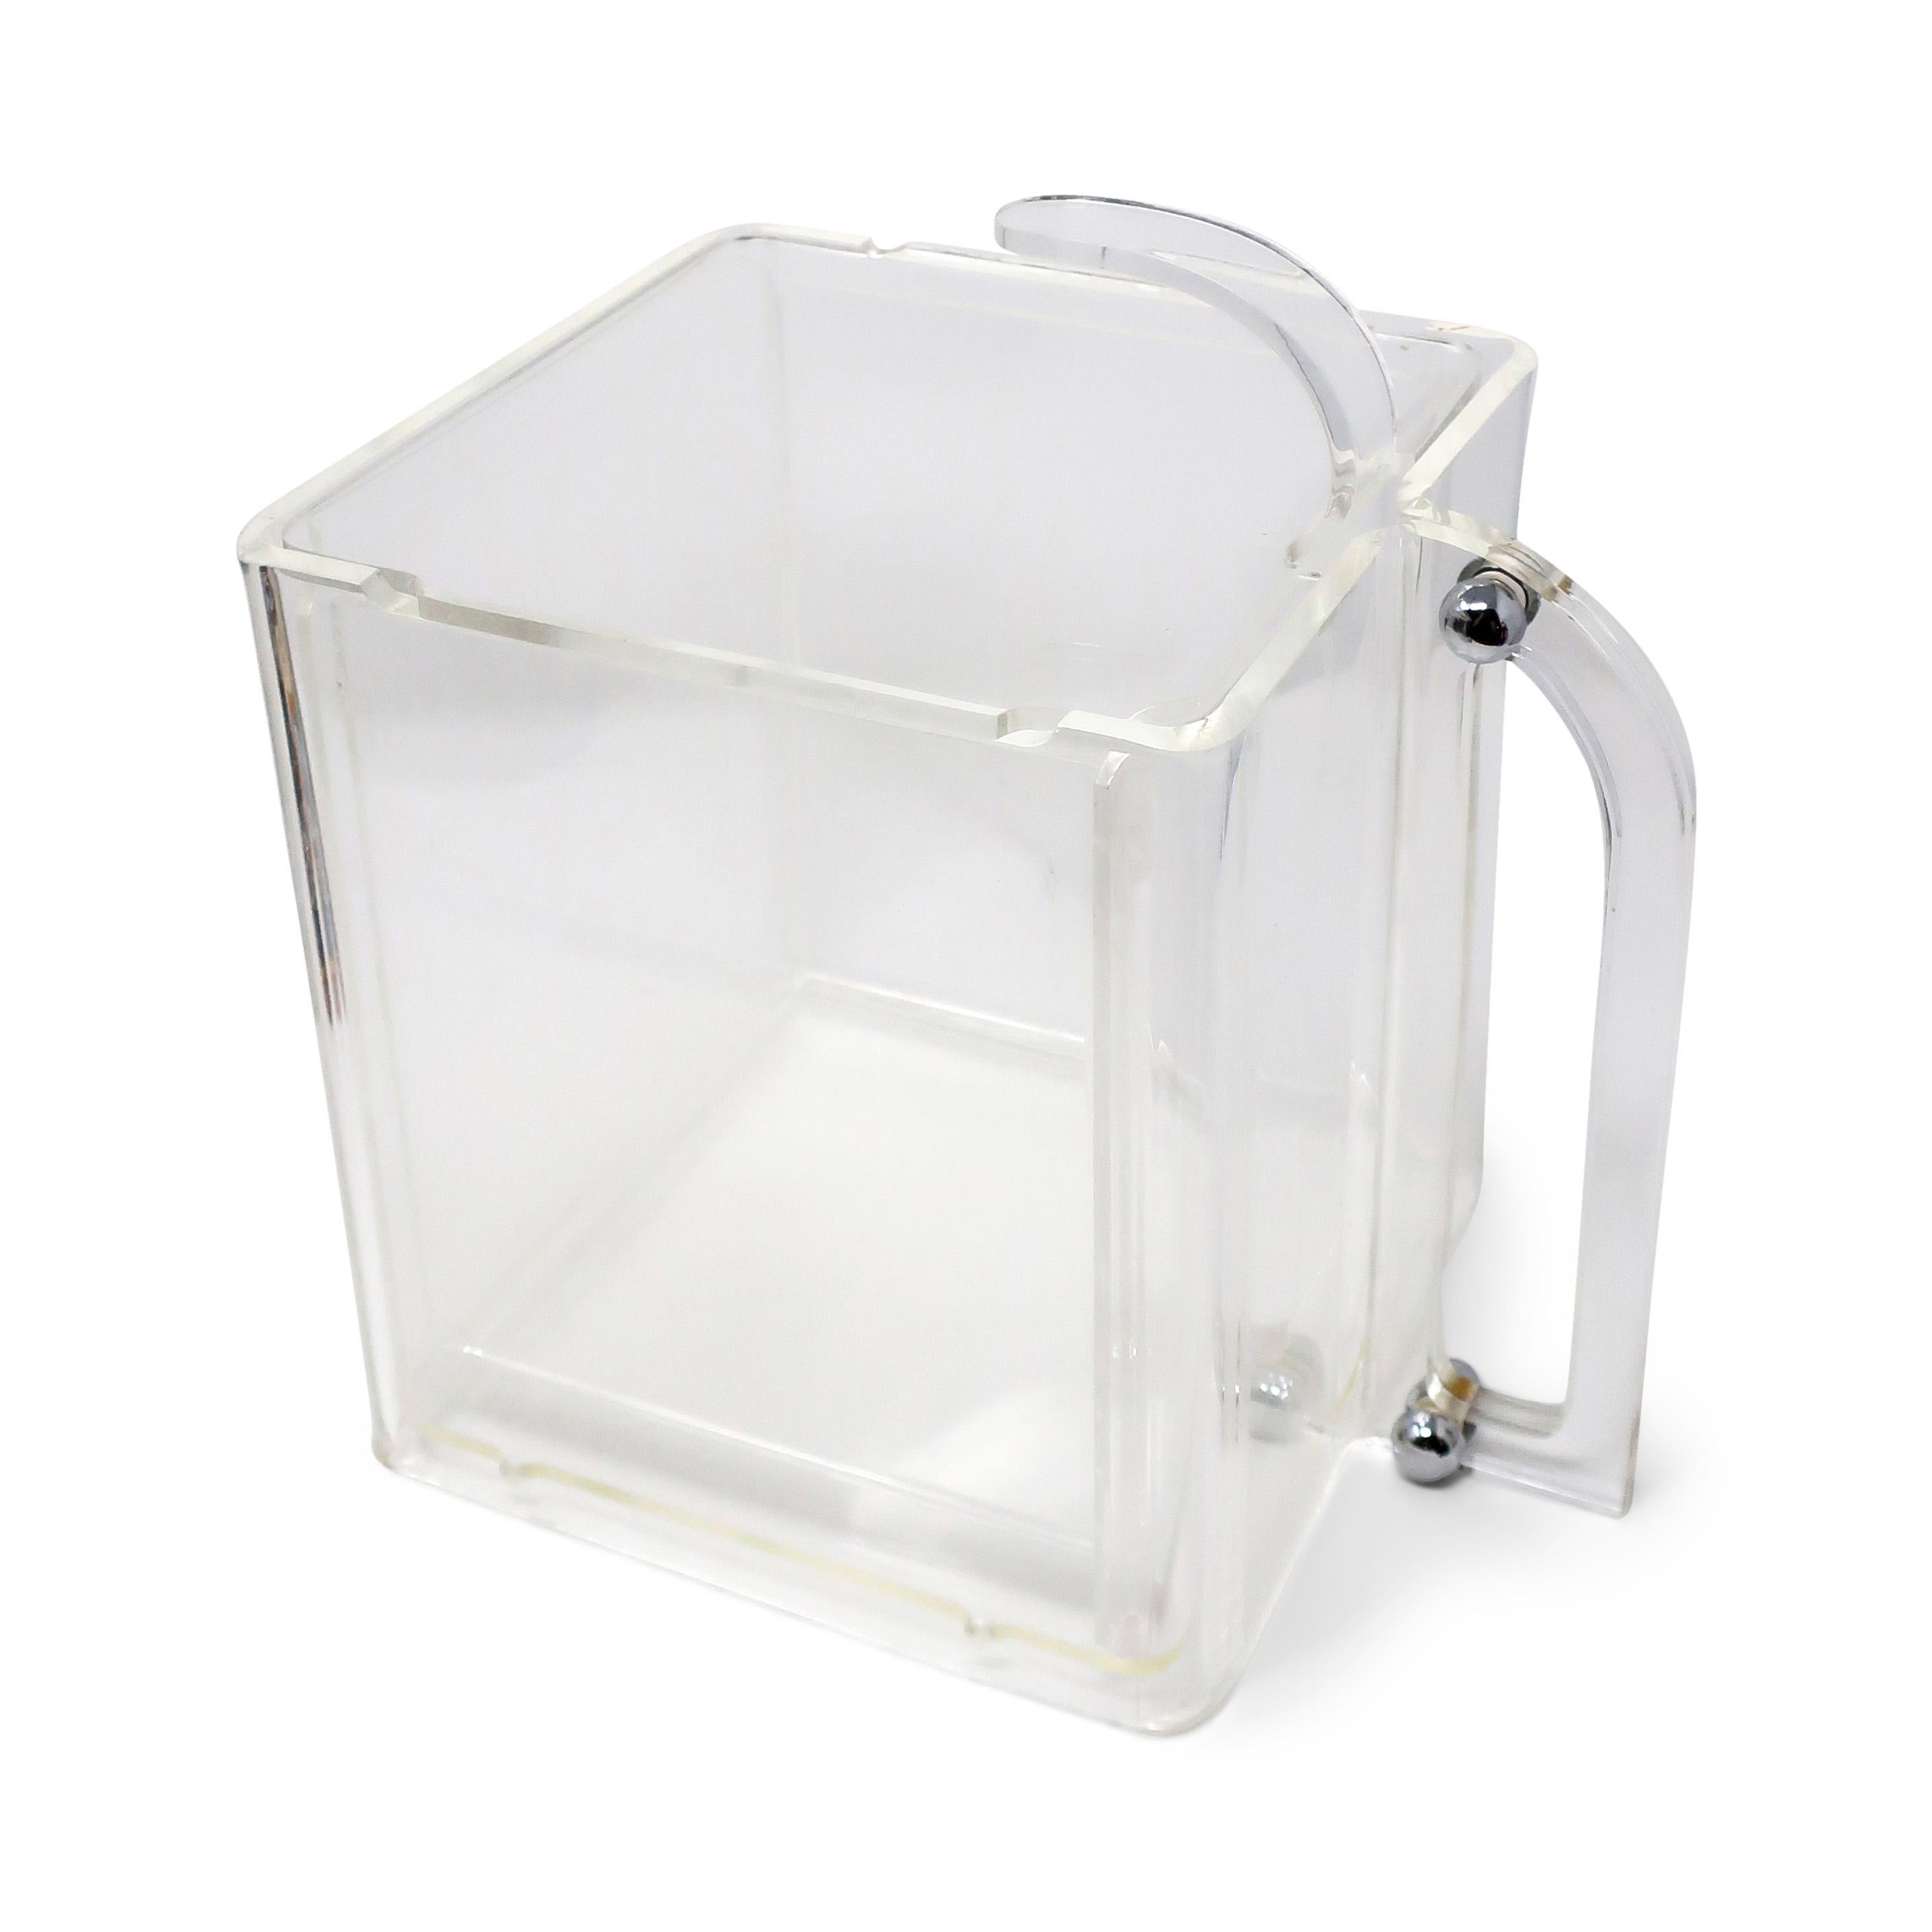 1970s Lucite and Chrome Ice Bucket In Good Condition For Sale In Brooklyn, NY